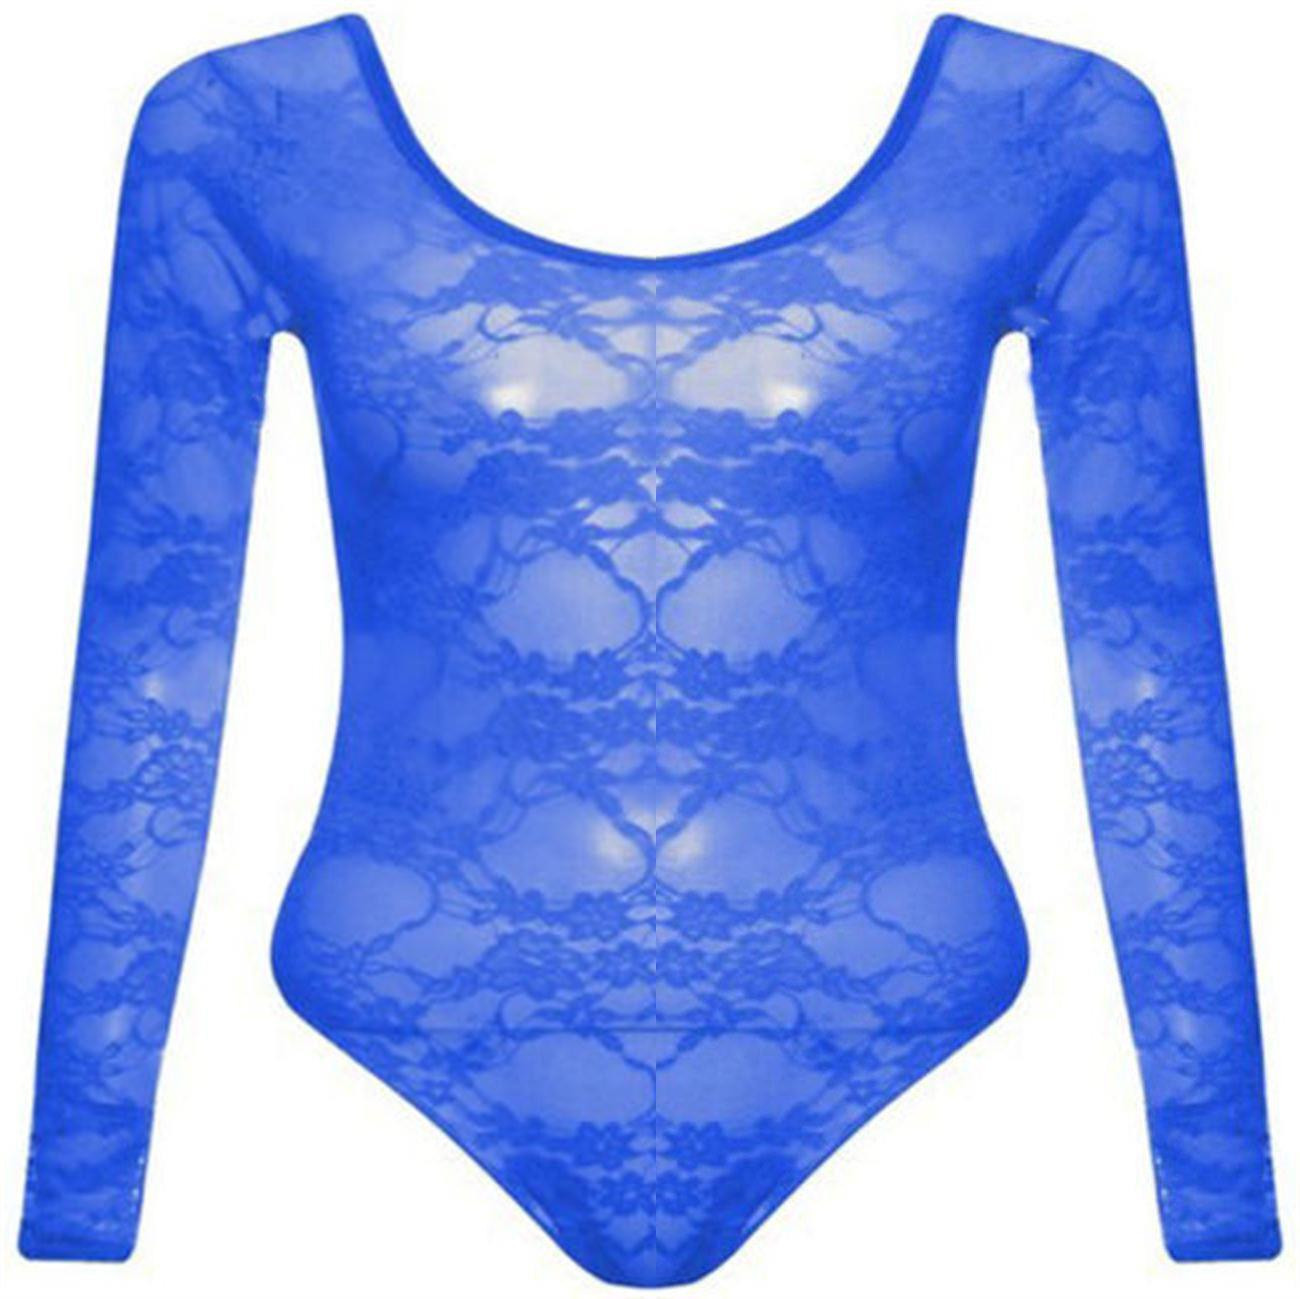 New Womens Plus Size Floral Lace Body Suits Long Sleeve Leotard Lace Tops